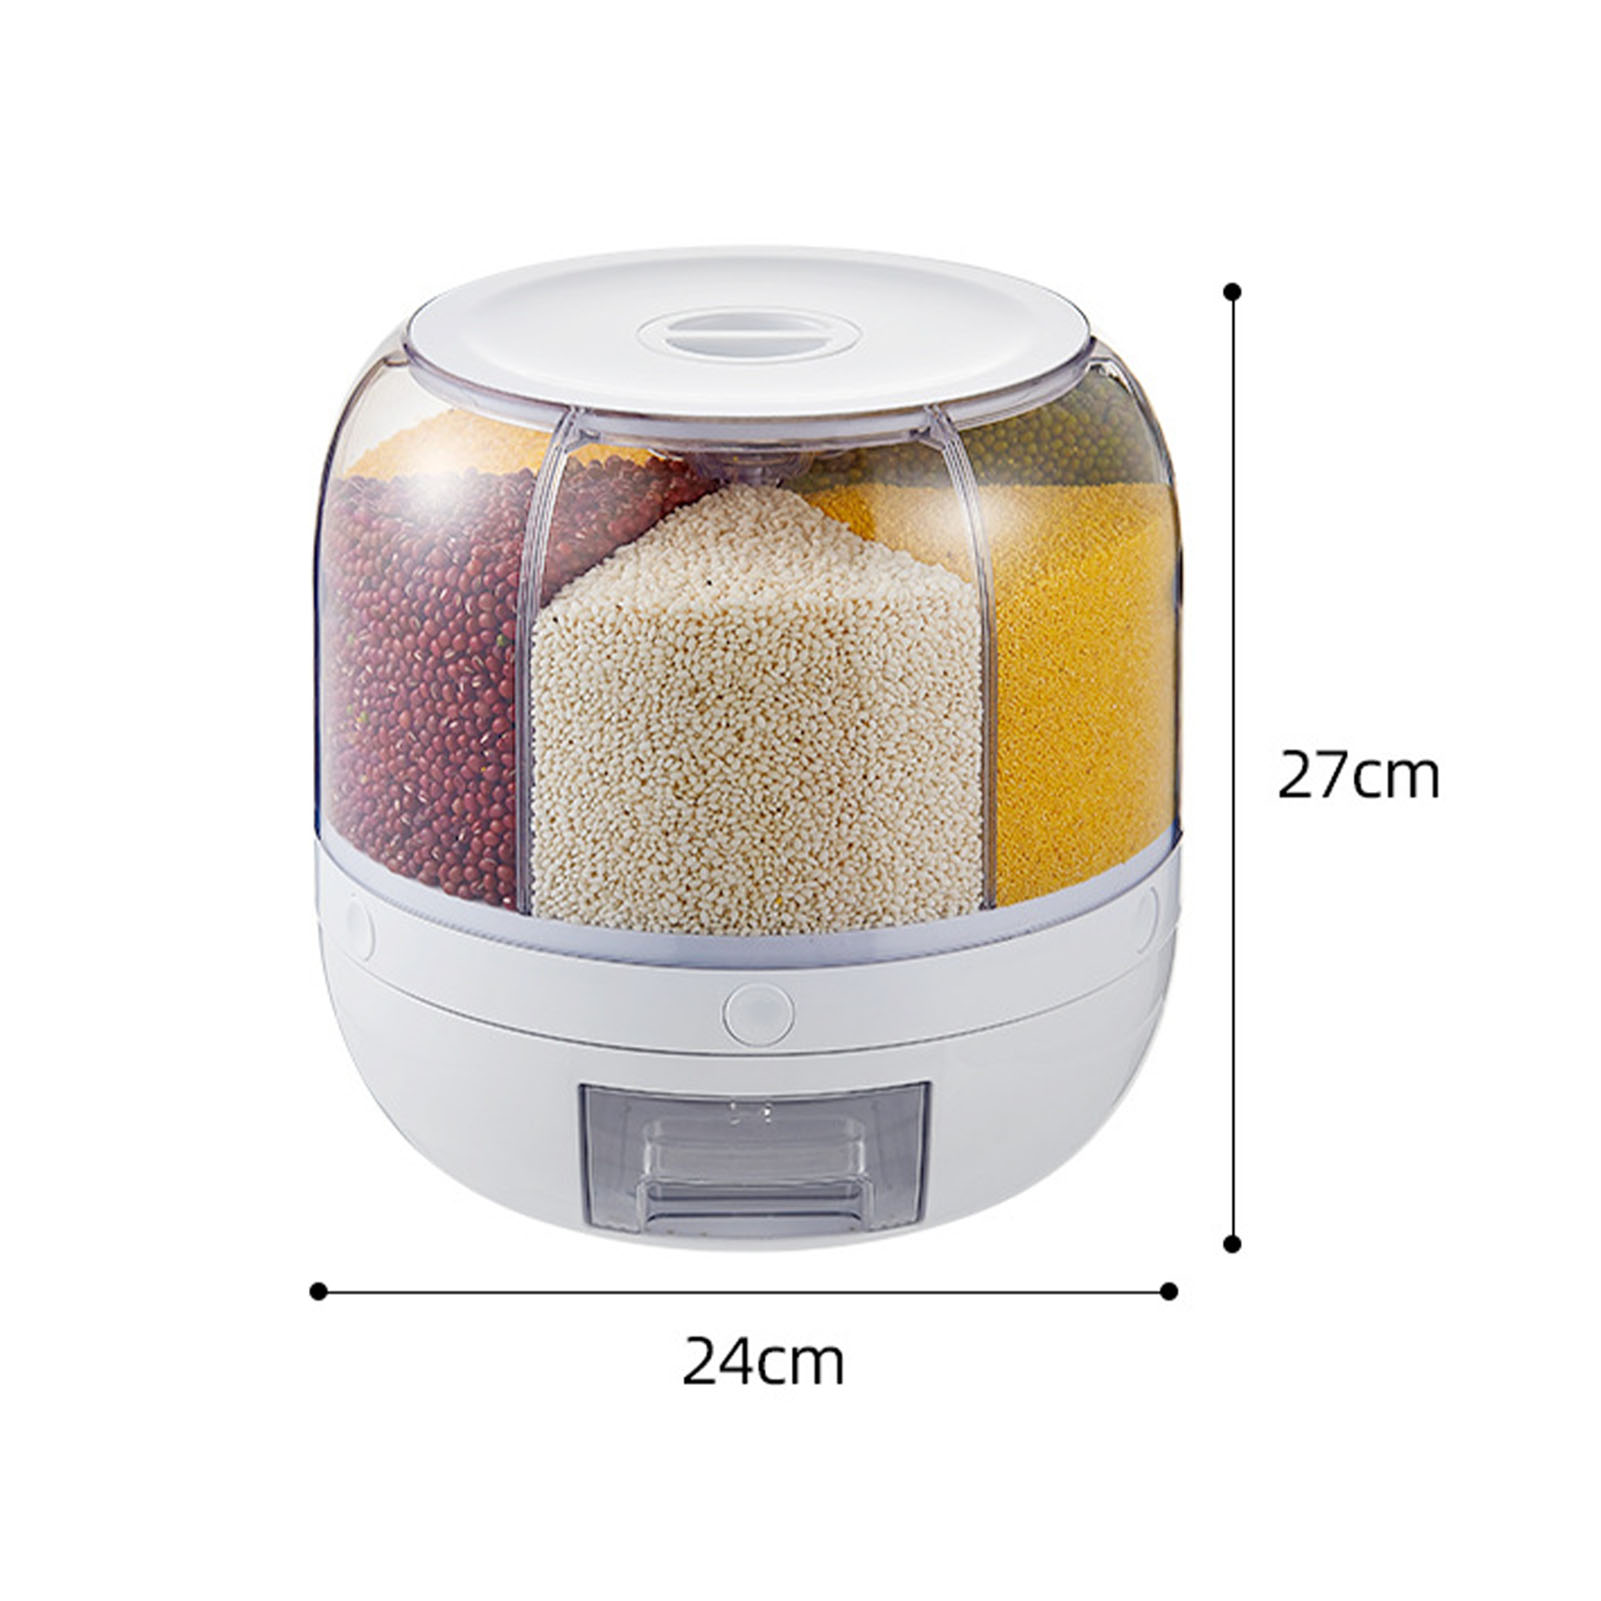 ECOBOX 360 Degree Rotating Kitchen Plastic Sealed Rice Grain Cereal Dispenser Dry Food Storage Container Box Food Dispensers